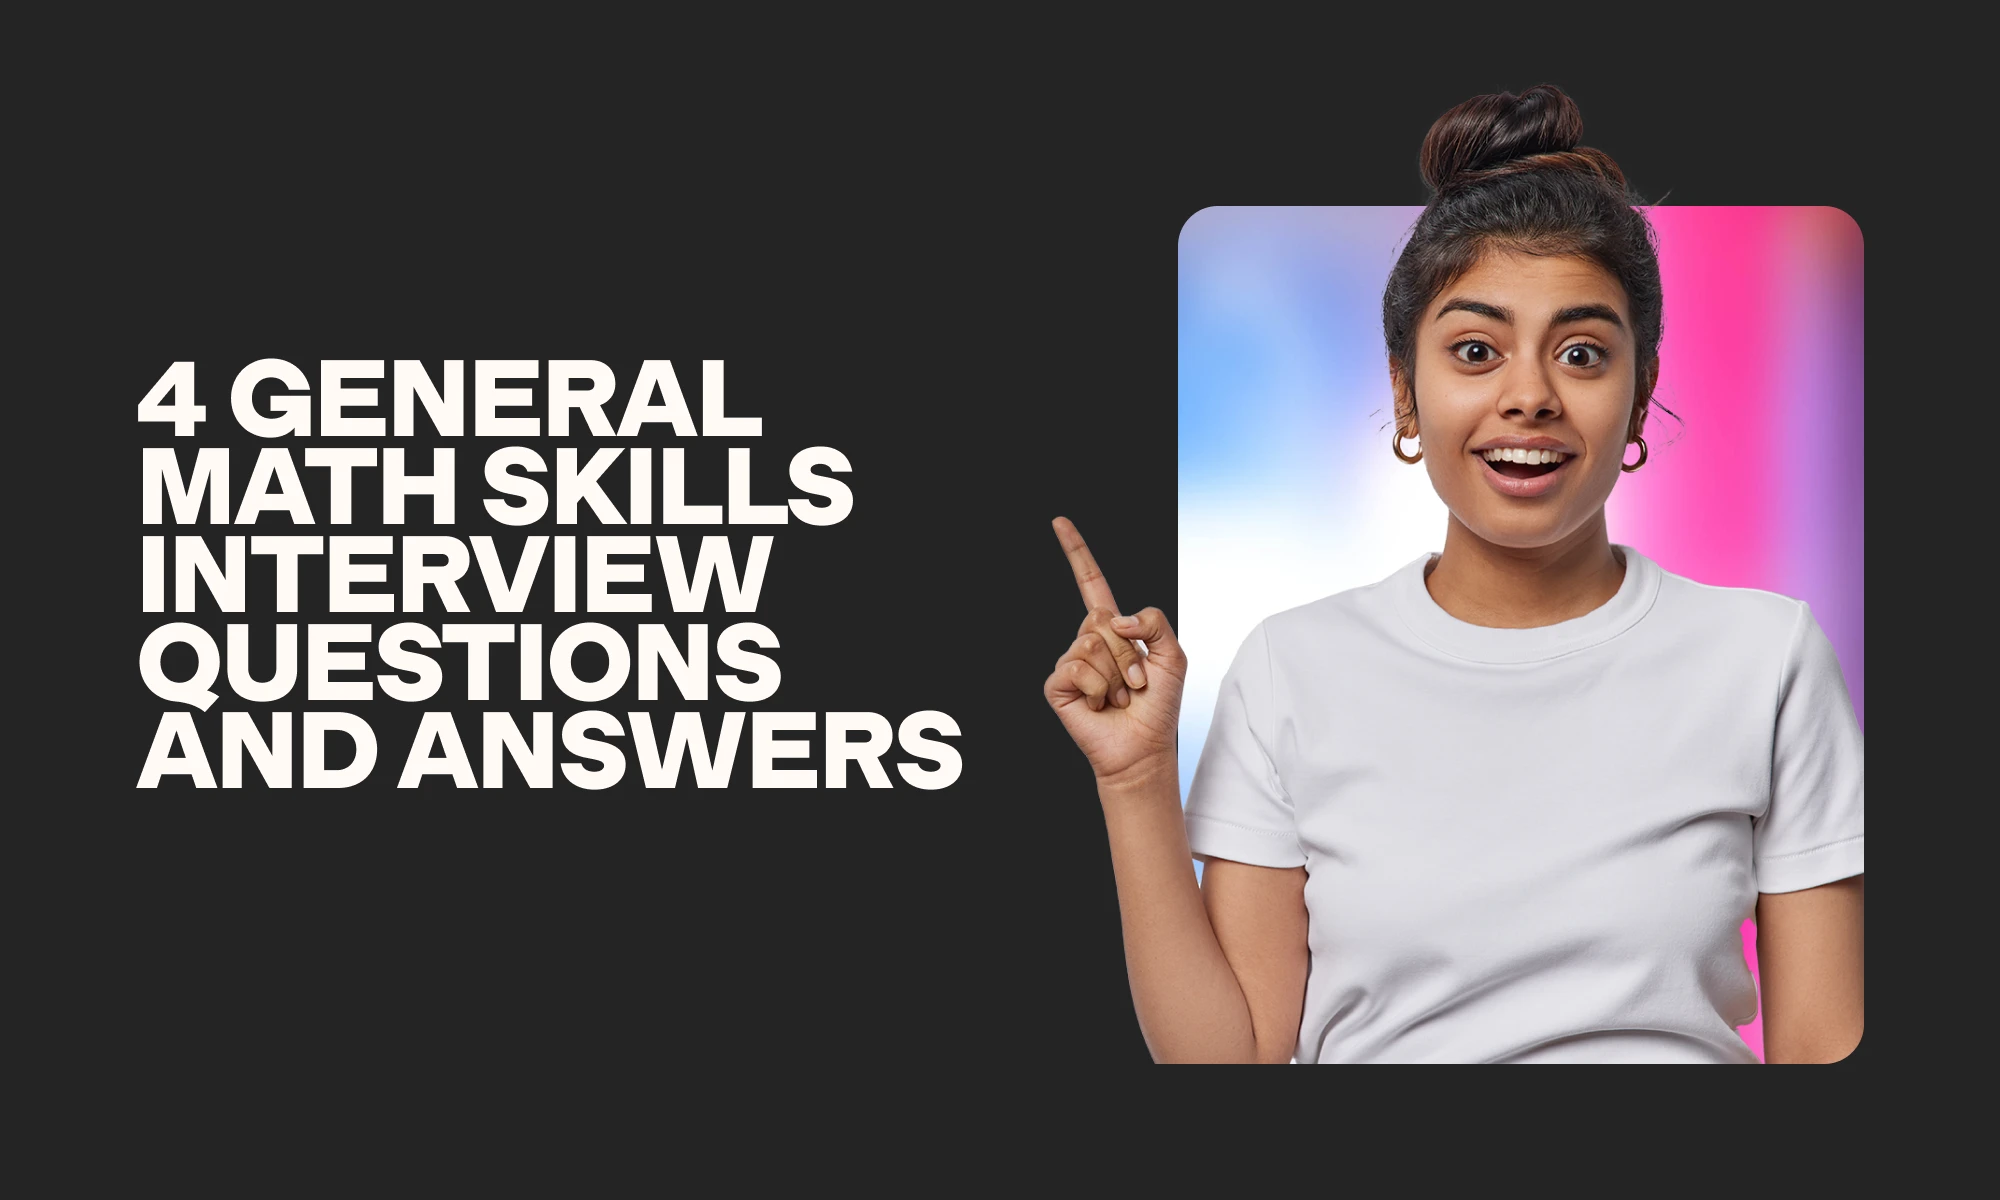 image showing general math skills interview questions and answers